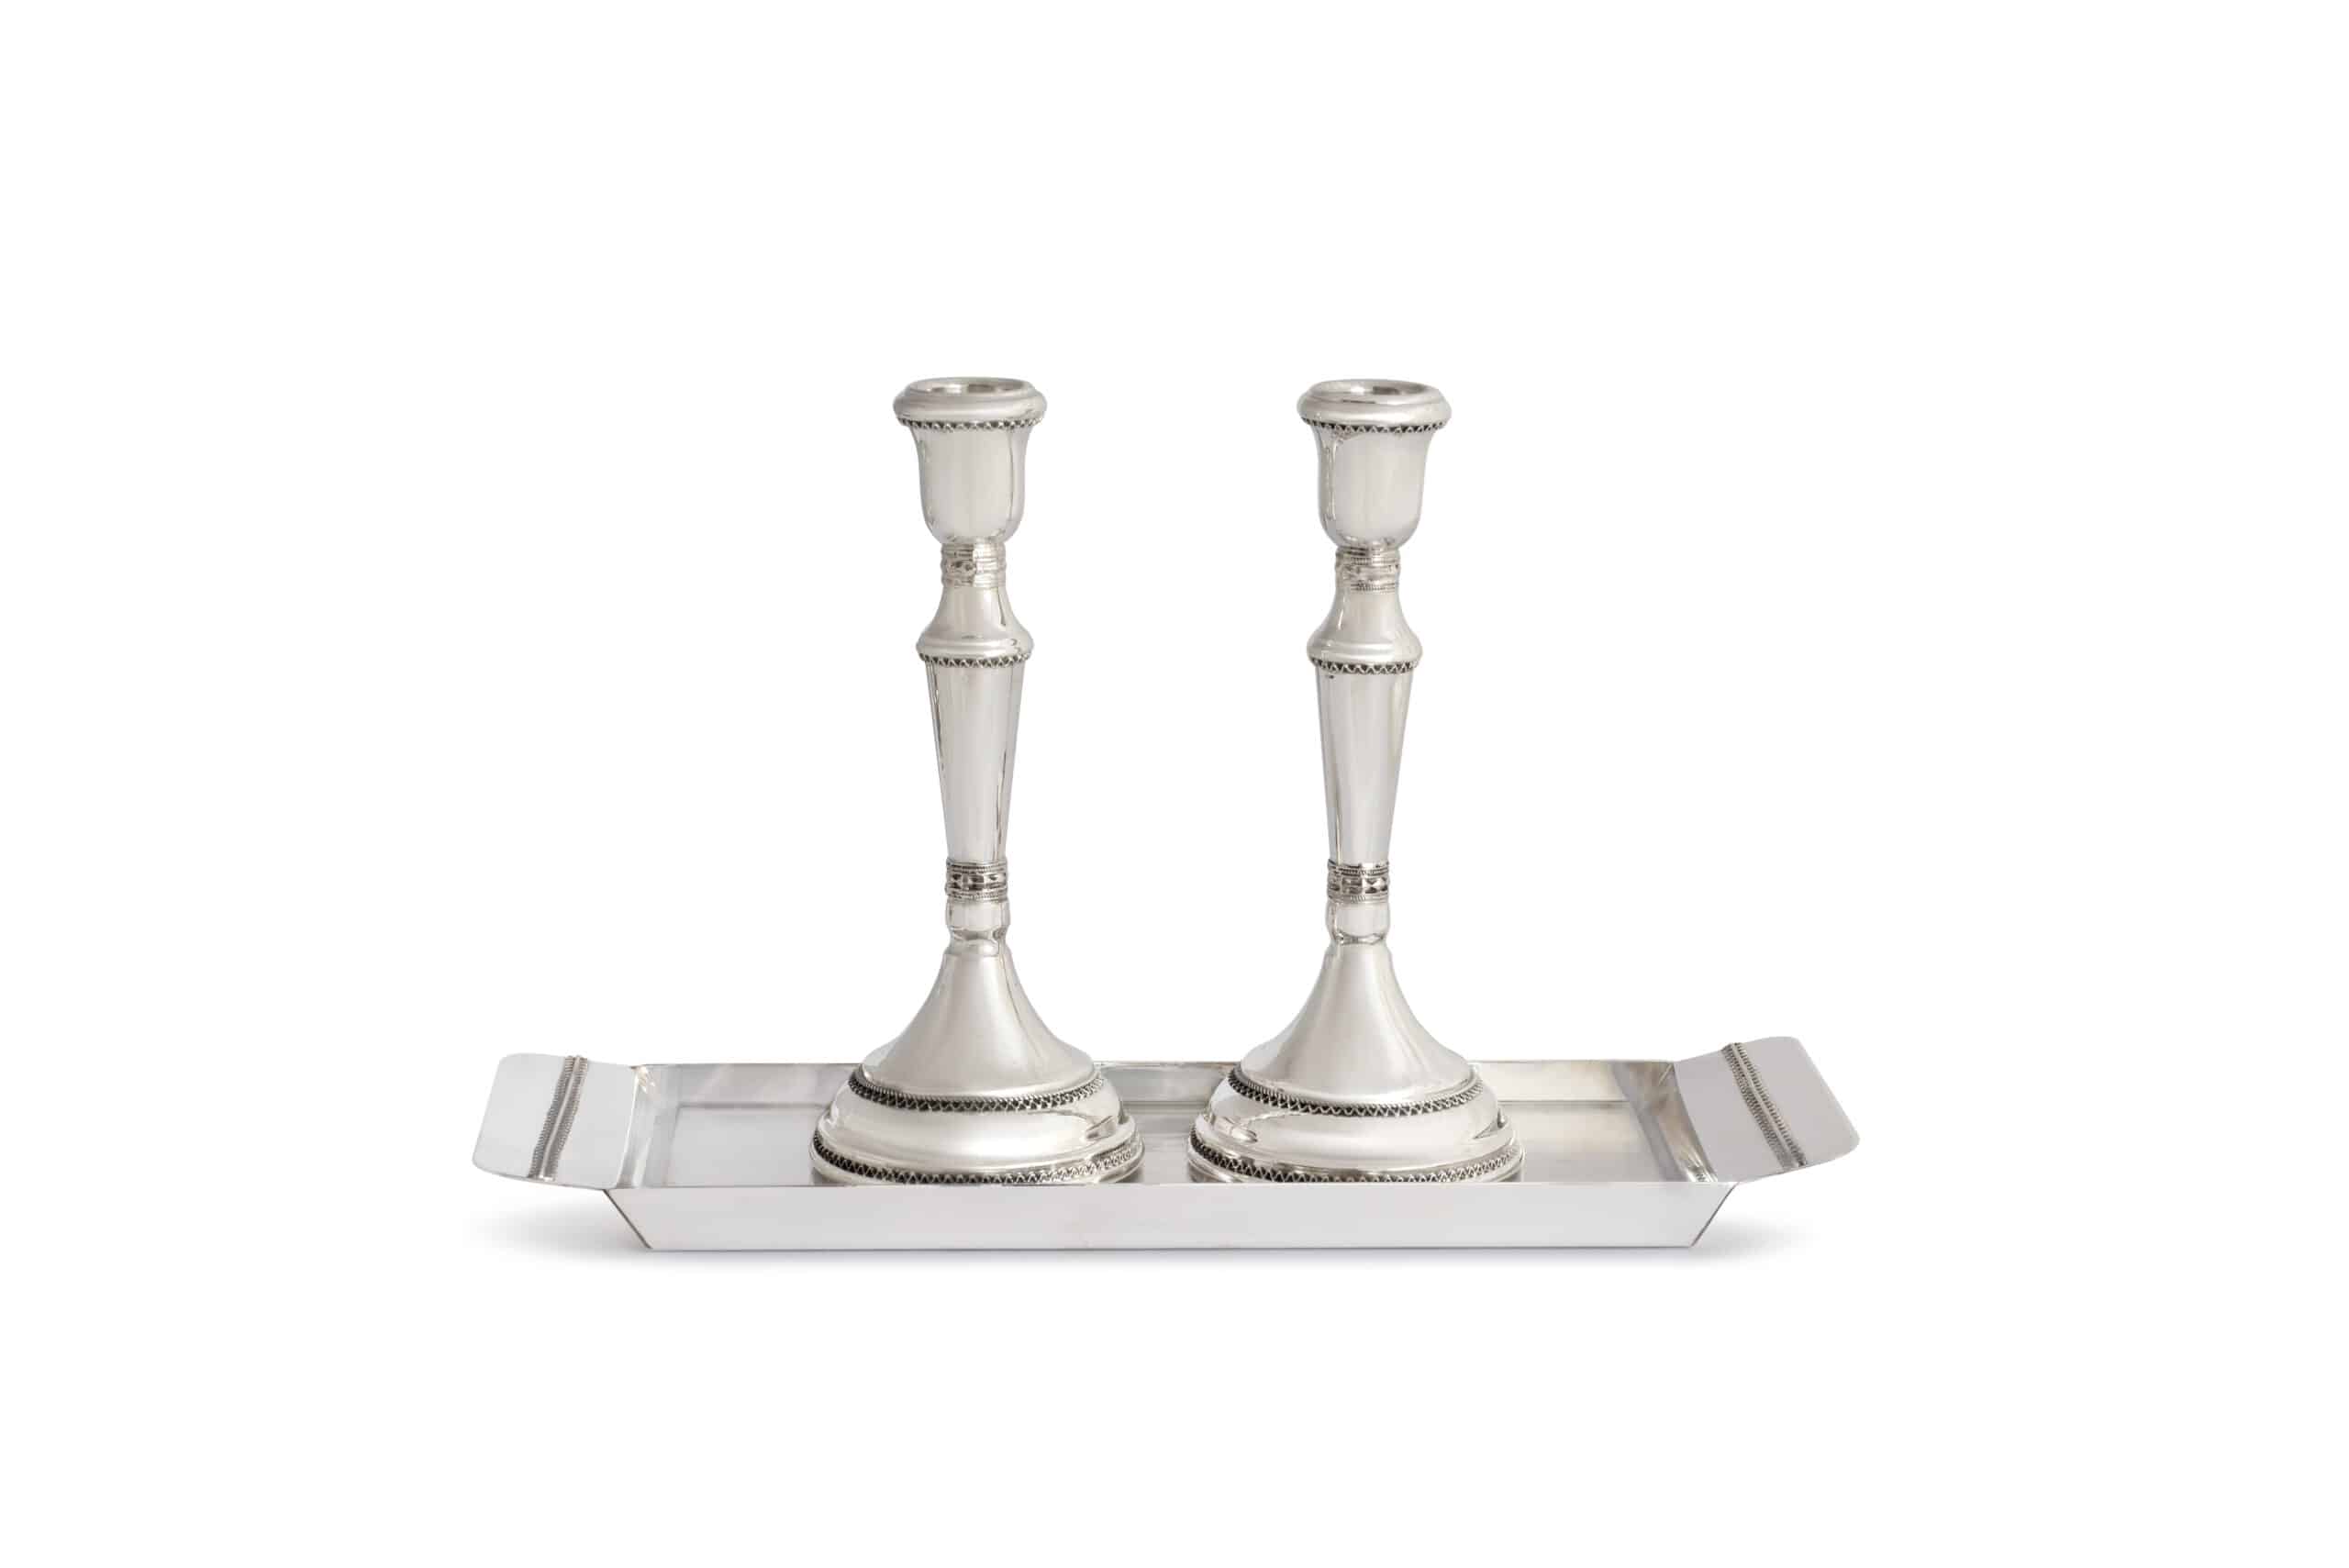 Classic Sterling Silver Candlesticks for Shabbat with Filigree